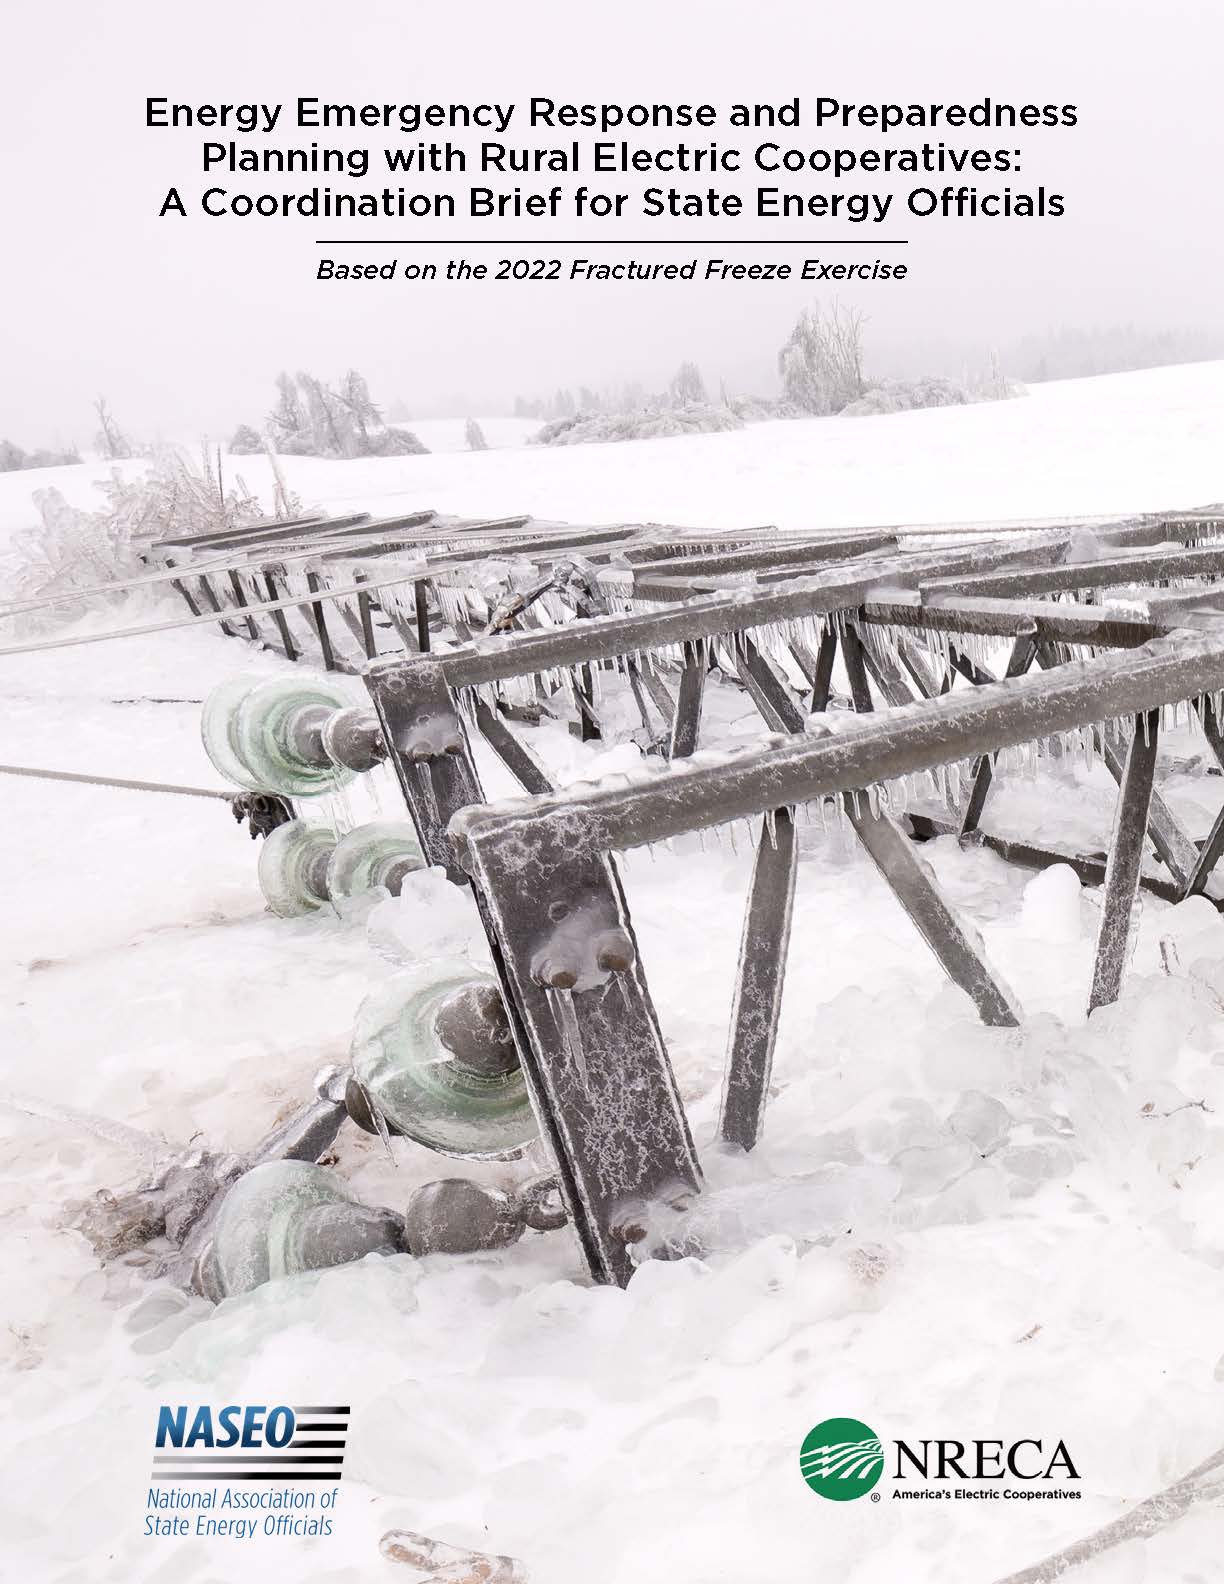 Emergency Response Coordination Brief for State Energy Offices and Rural Electric Cooperatives